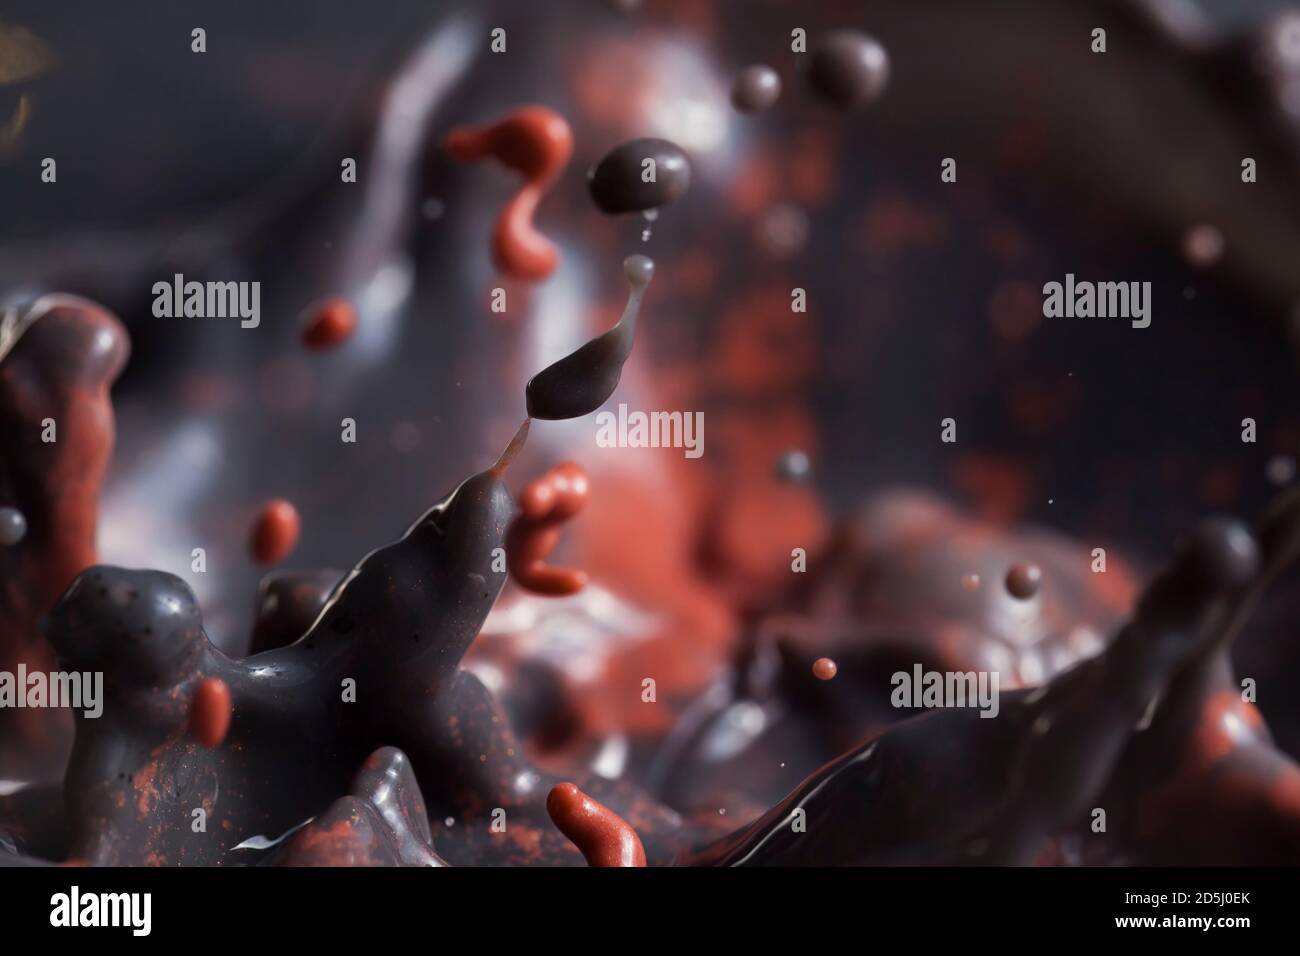 Lava bubbling inside a volcano - Black and red paint splashing creating lots of paint bubbles and droplets. Stock Photo